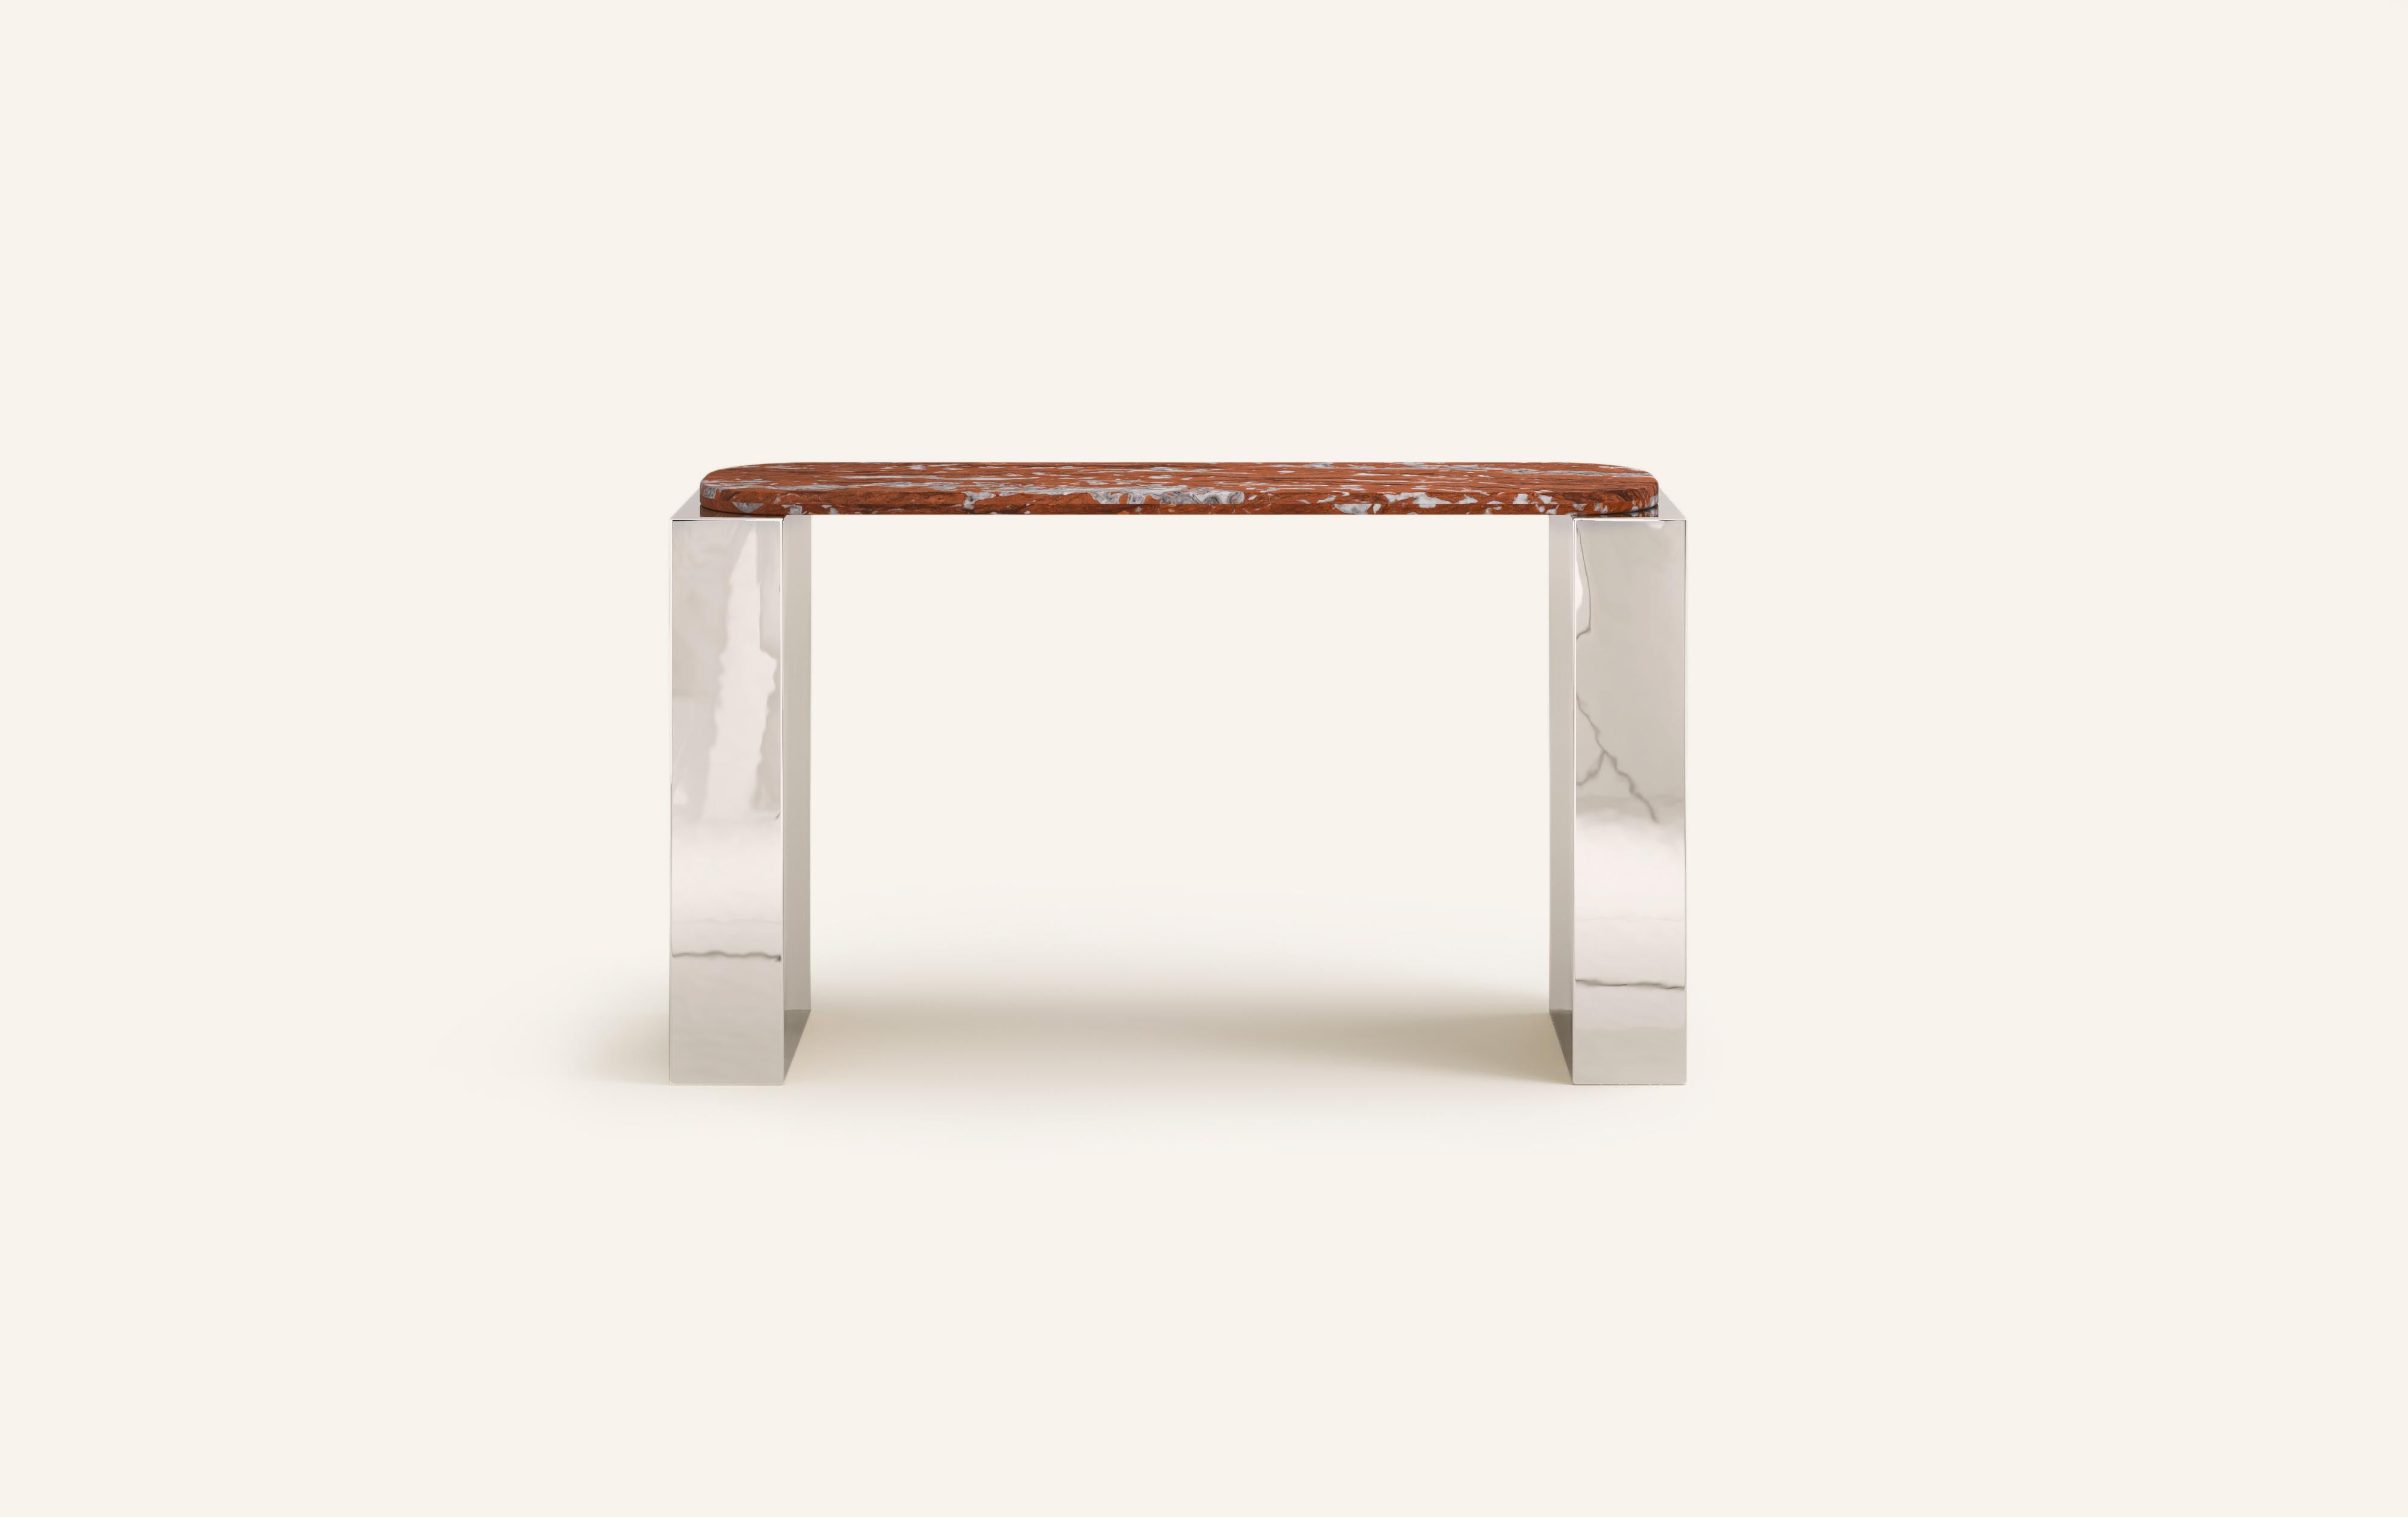 MONOLITHIC FORMS SOFTENED BY GENTLE EDGES. WITH ITS BOLD MARBLE PATTERNS CUBO IS AS VERSATILE AS IT IS STRIKING.

DIMENSIONS:
50”L x 17”W x 36”H: 
- 48”L x 15”W x 1.5” THICK TABLETOP WITH WITH 6